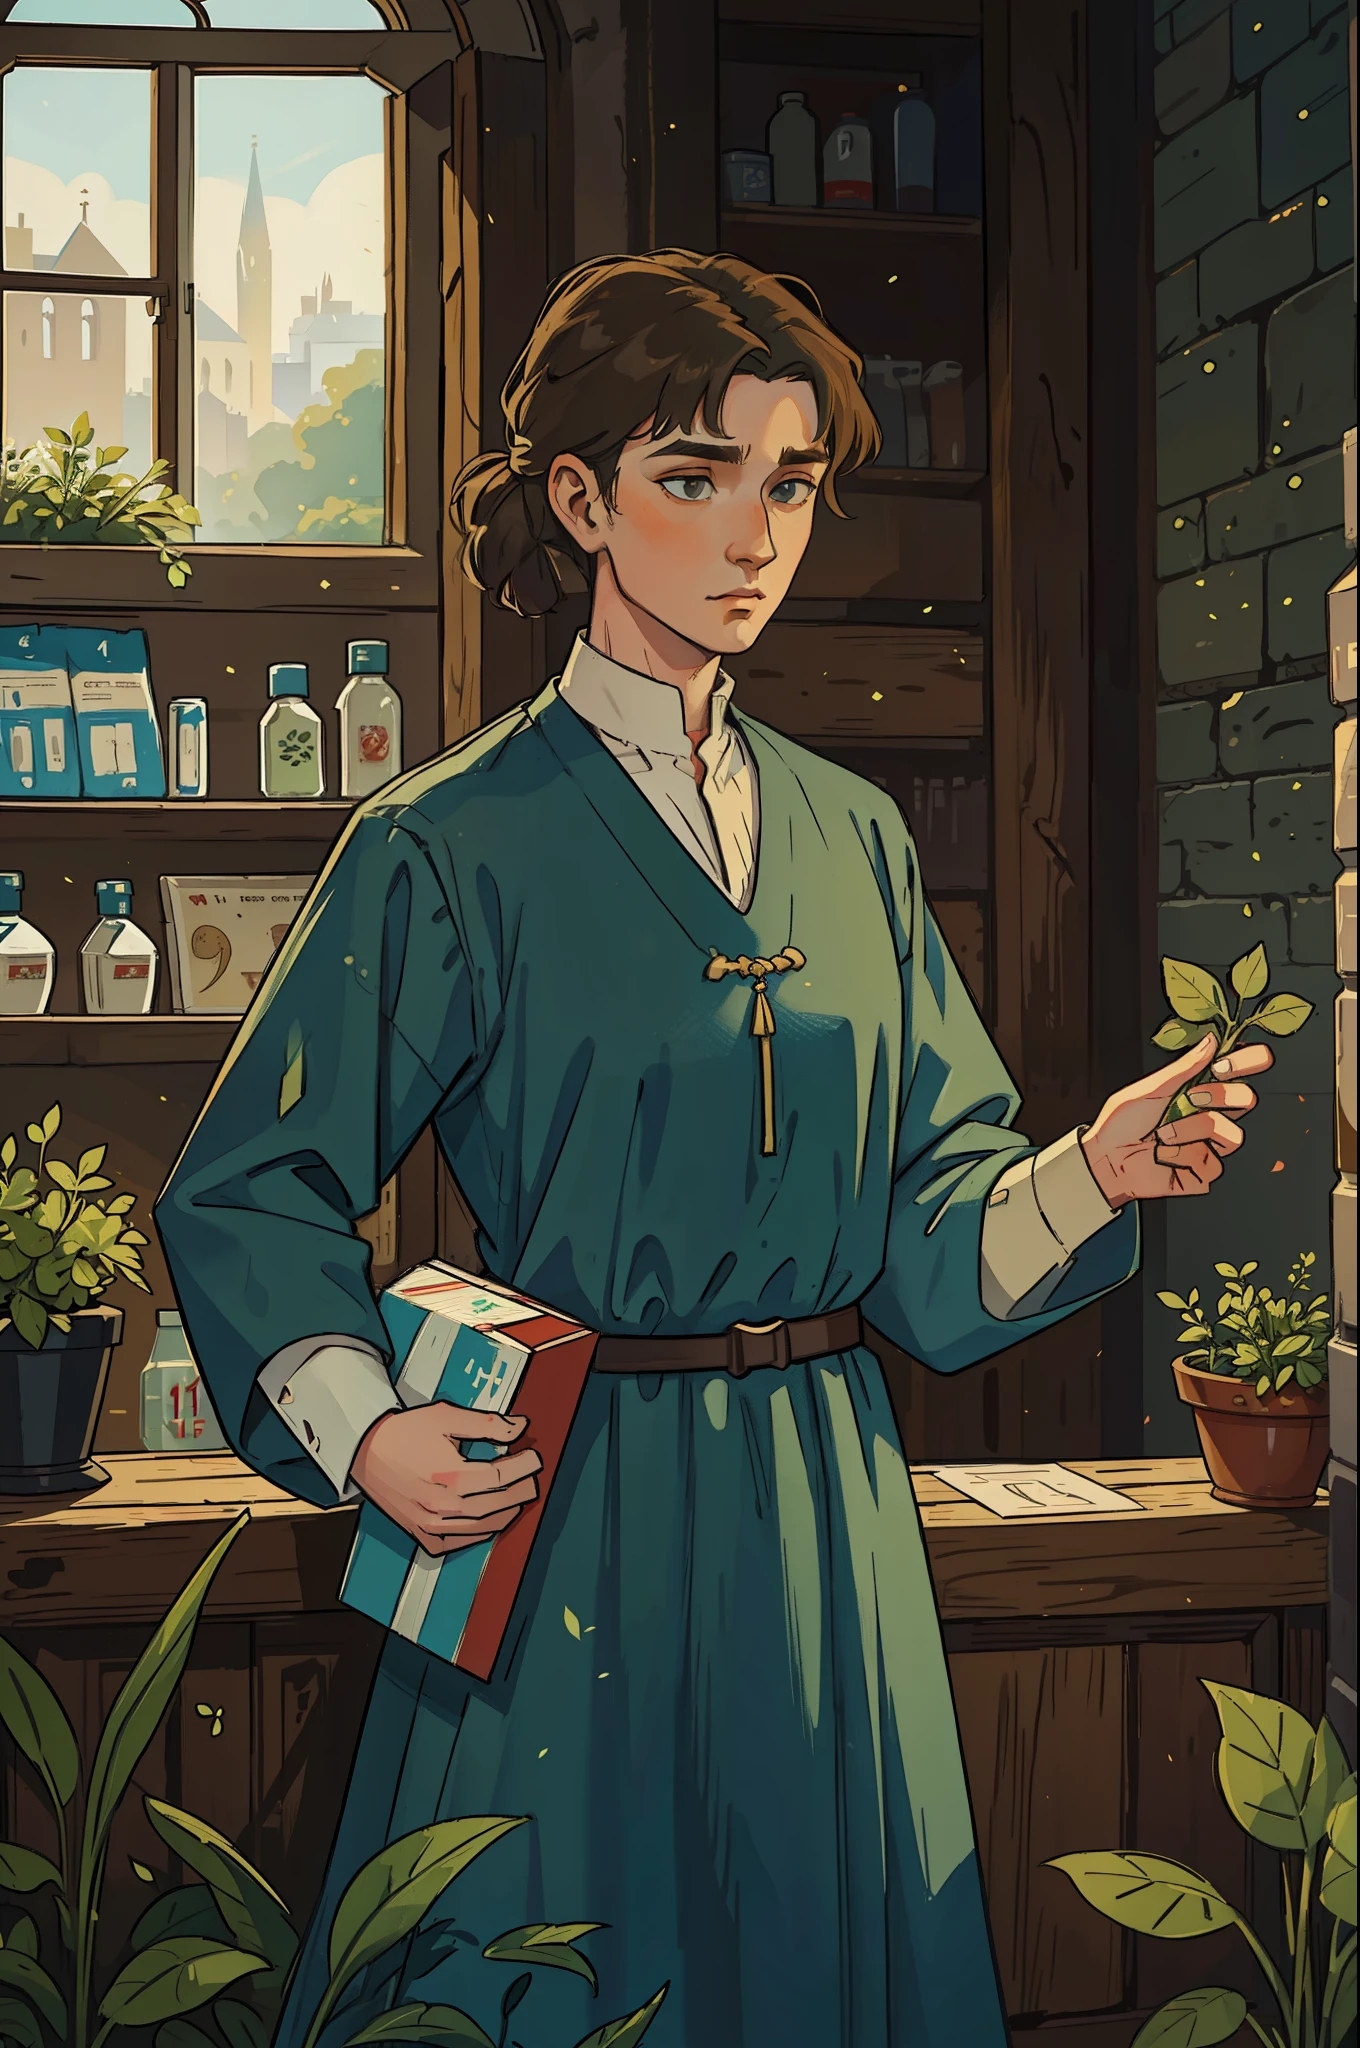 ano: 11th century. Location: Londres. Pre-Raphaelite scene with a 31-year-old Englishman, medic, buying herbs in a pharmacy, ((((11th century plain tunic)))) ((11th century hairstyle)), (((Film style)))